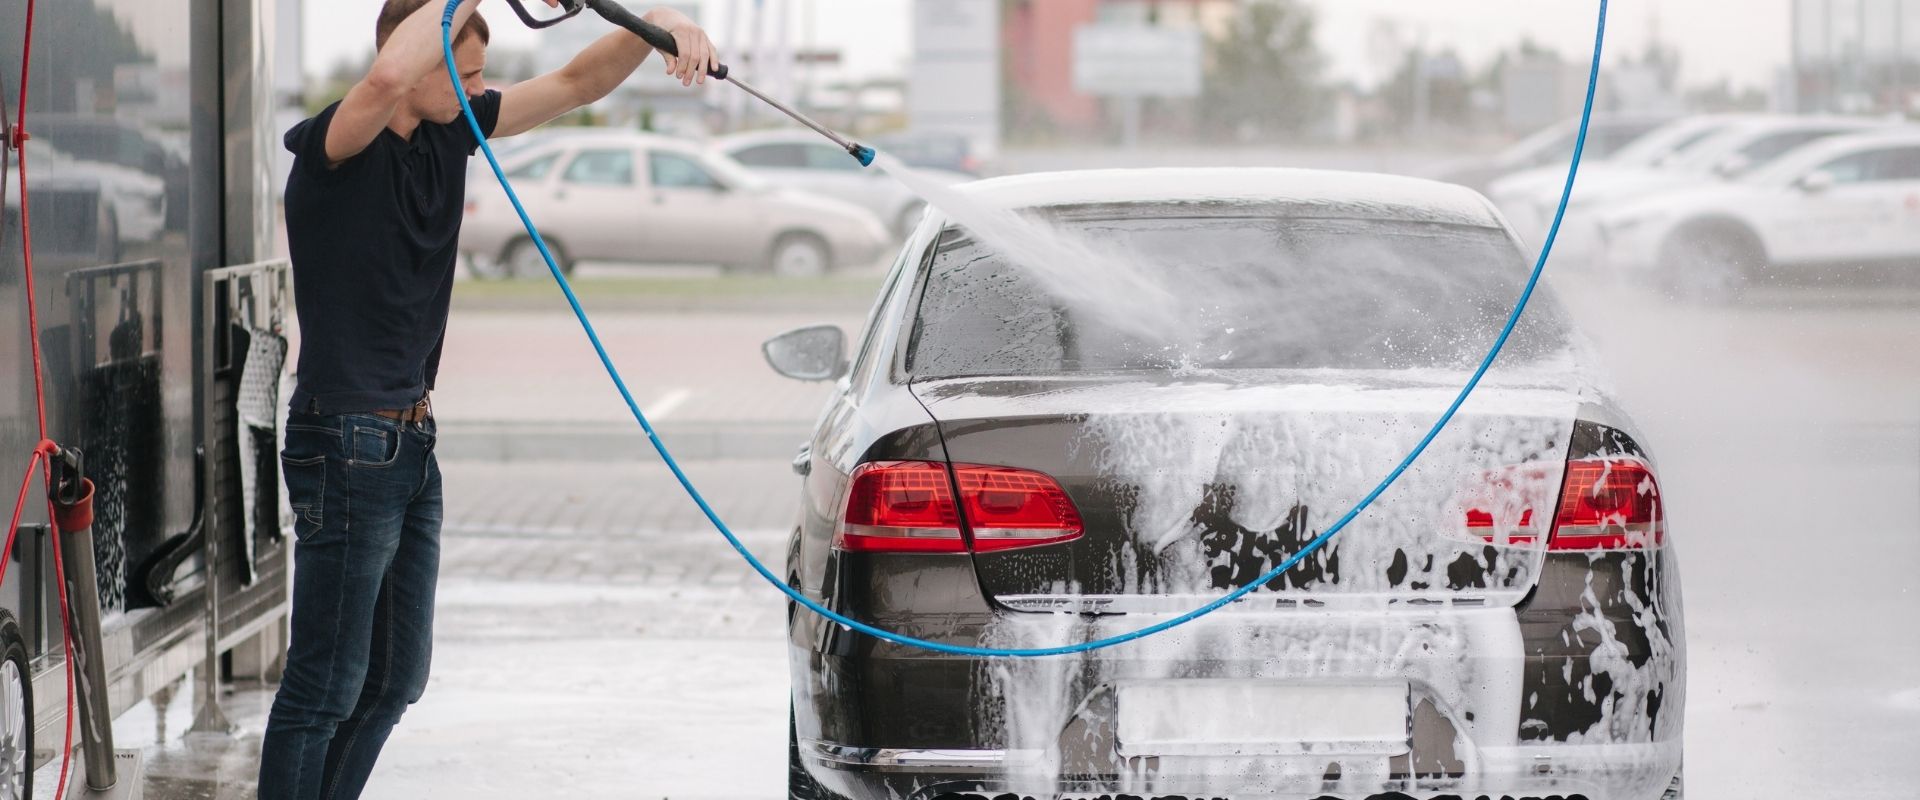 You are currently viewing How to start a car wash business in Dubai, UAE? | Business Setup in Dubai